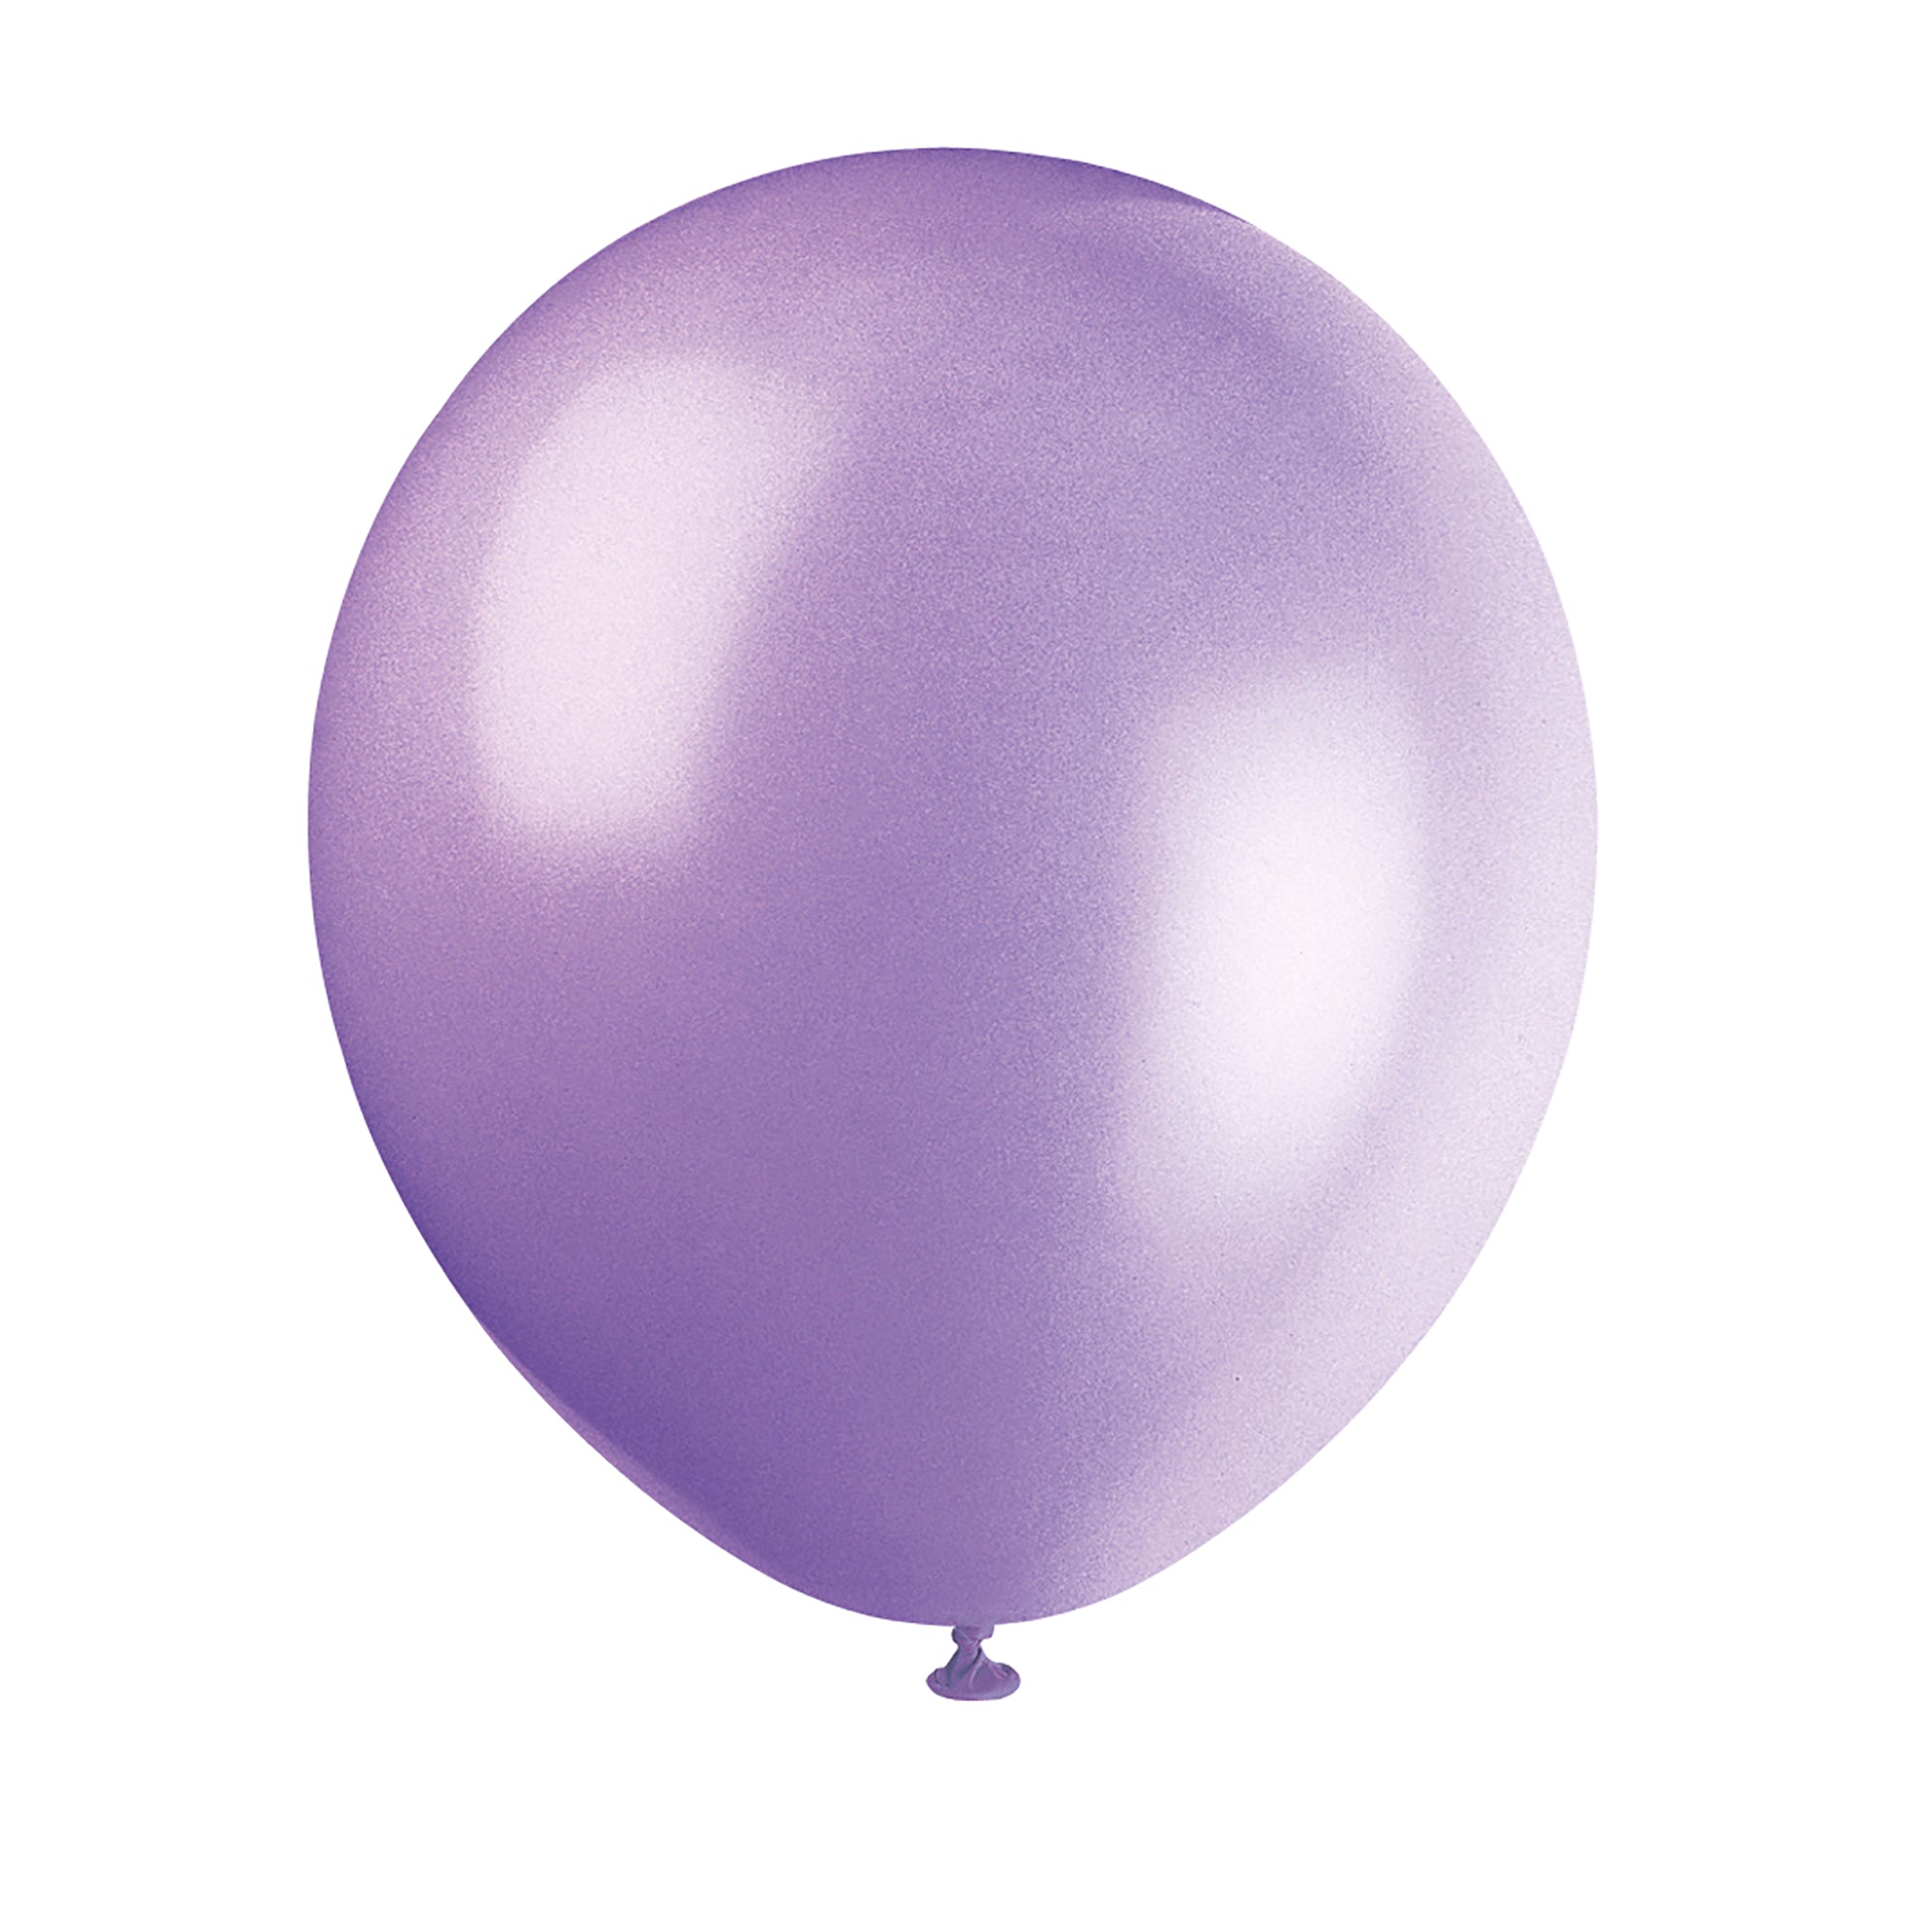 10 Latex Balloons 12in Lavender